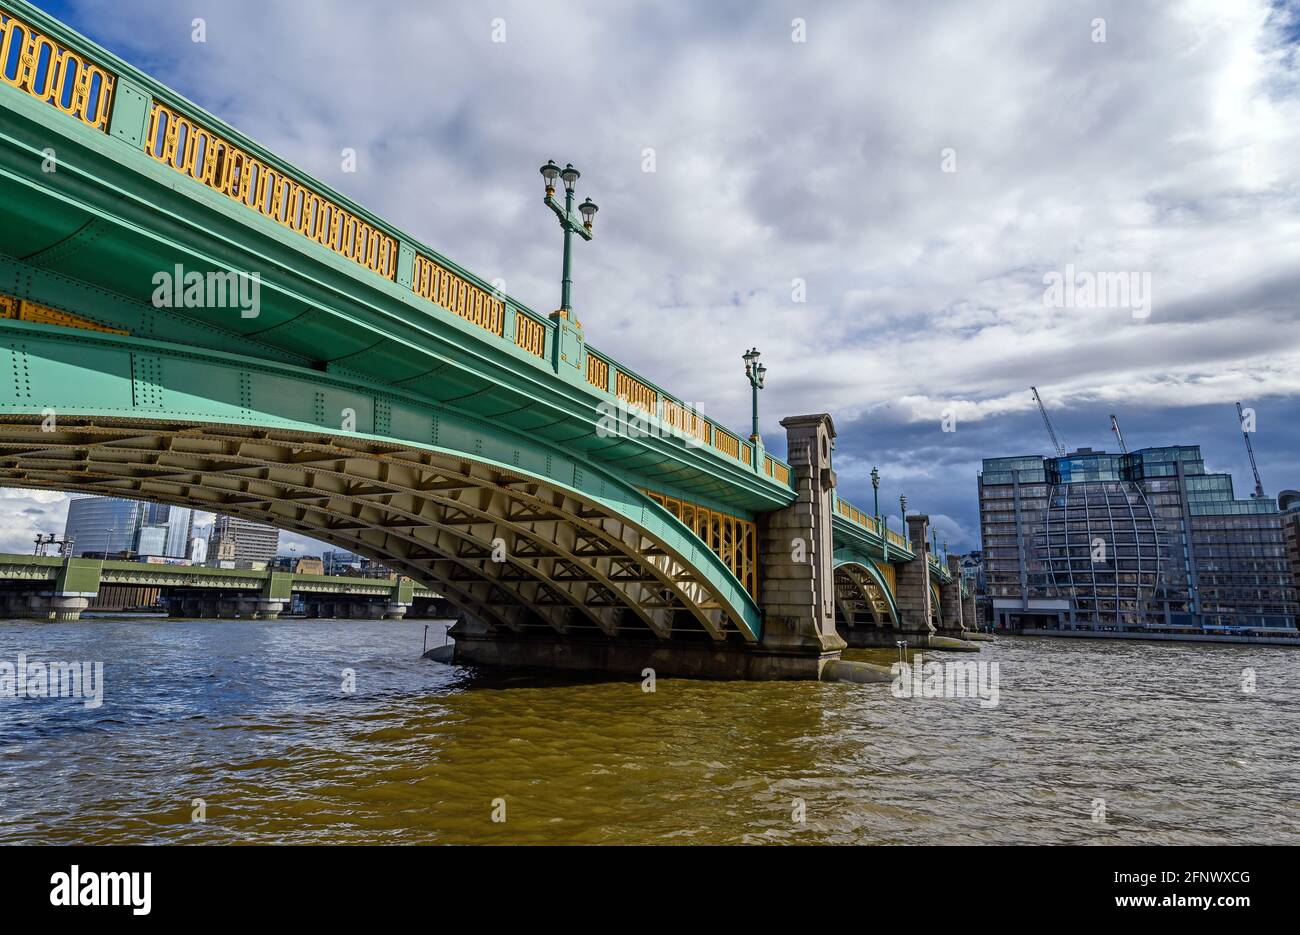 Southwark Bridge and River Thames in London, UK looking towards the south bank and Southwark. Beyond is the rail bridge to Cannon Street Station. Stock Photo